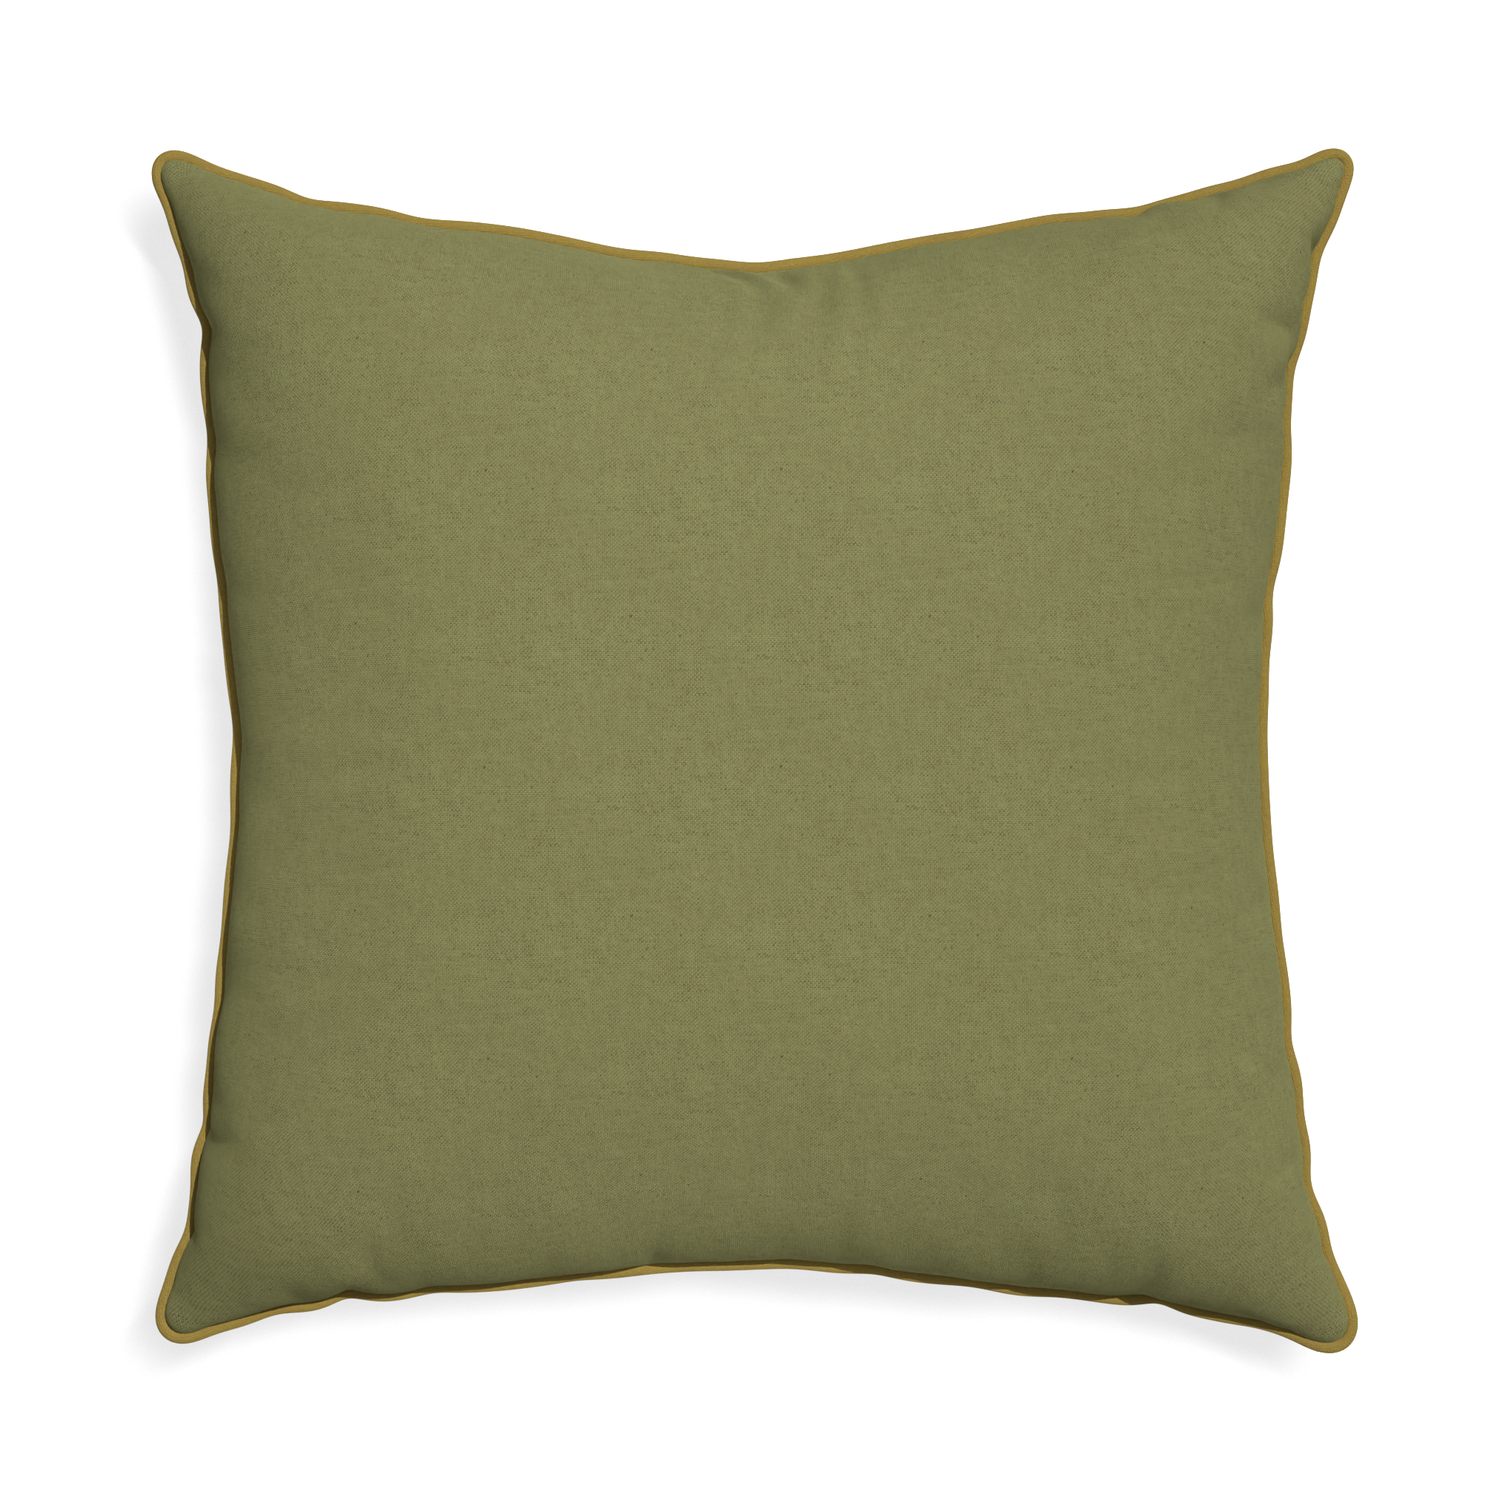 Euro-sham moss custom moss greenpillow with c piping on white background